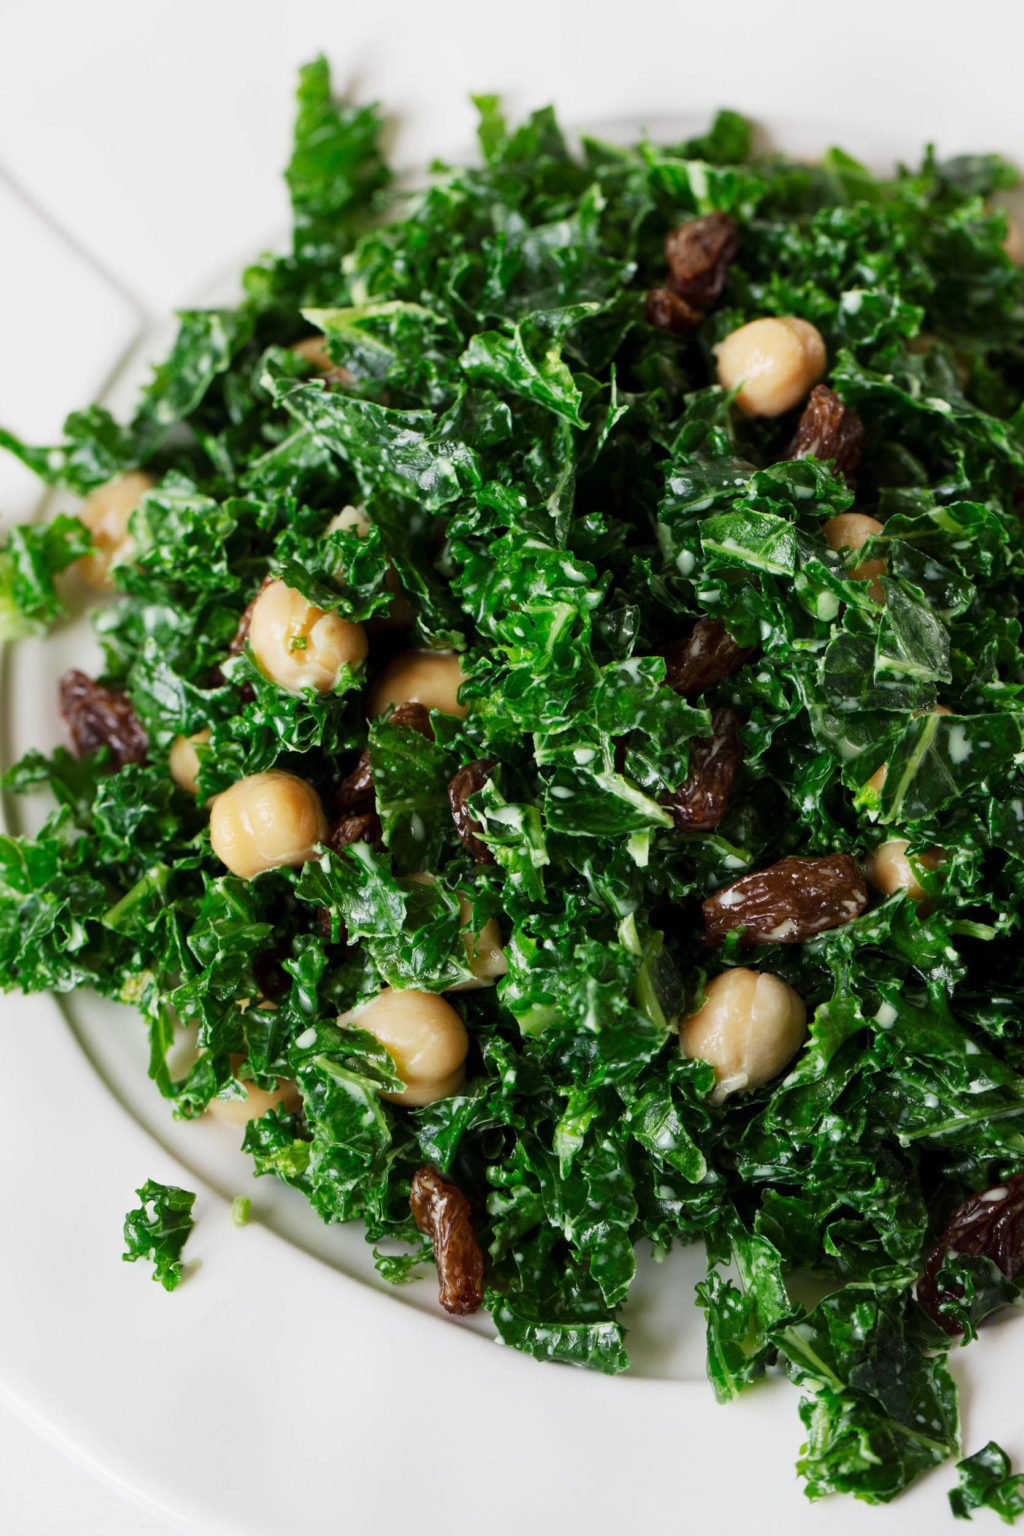 A close-up photograph of a tahini mint kale salad, which is studded with cooked chickpeas and raisins.